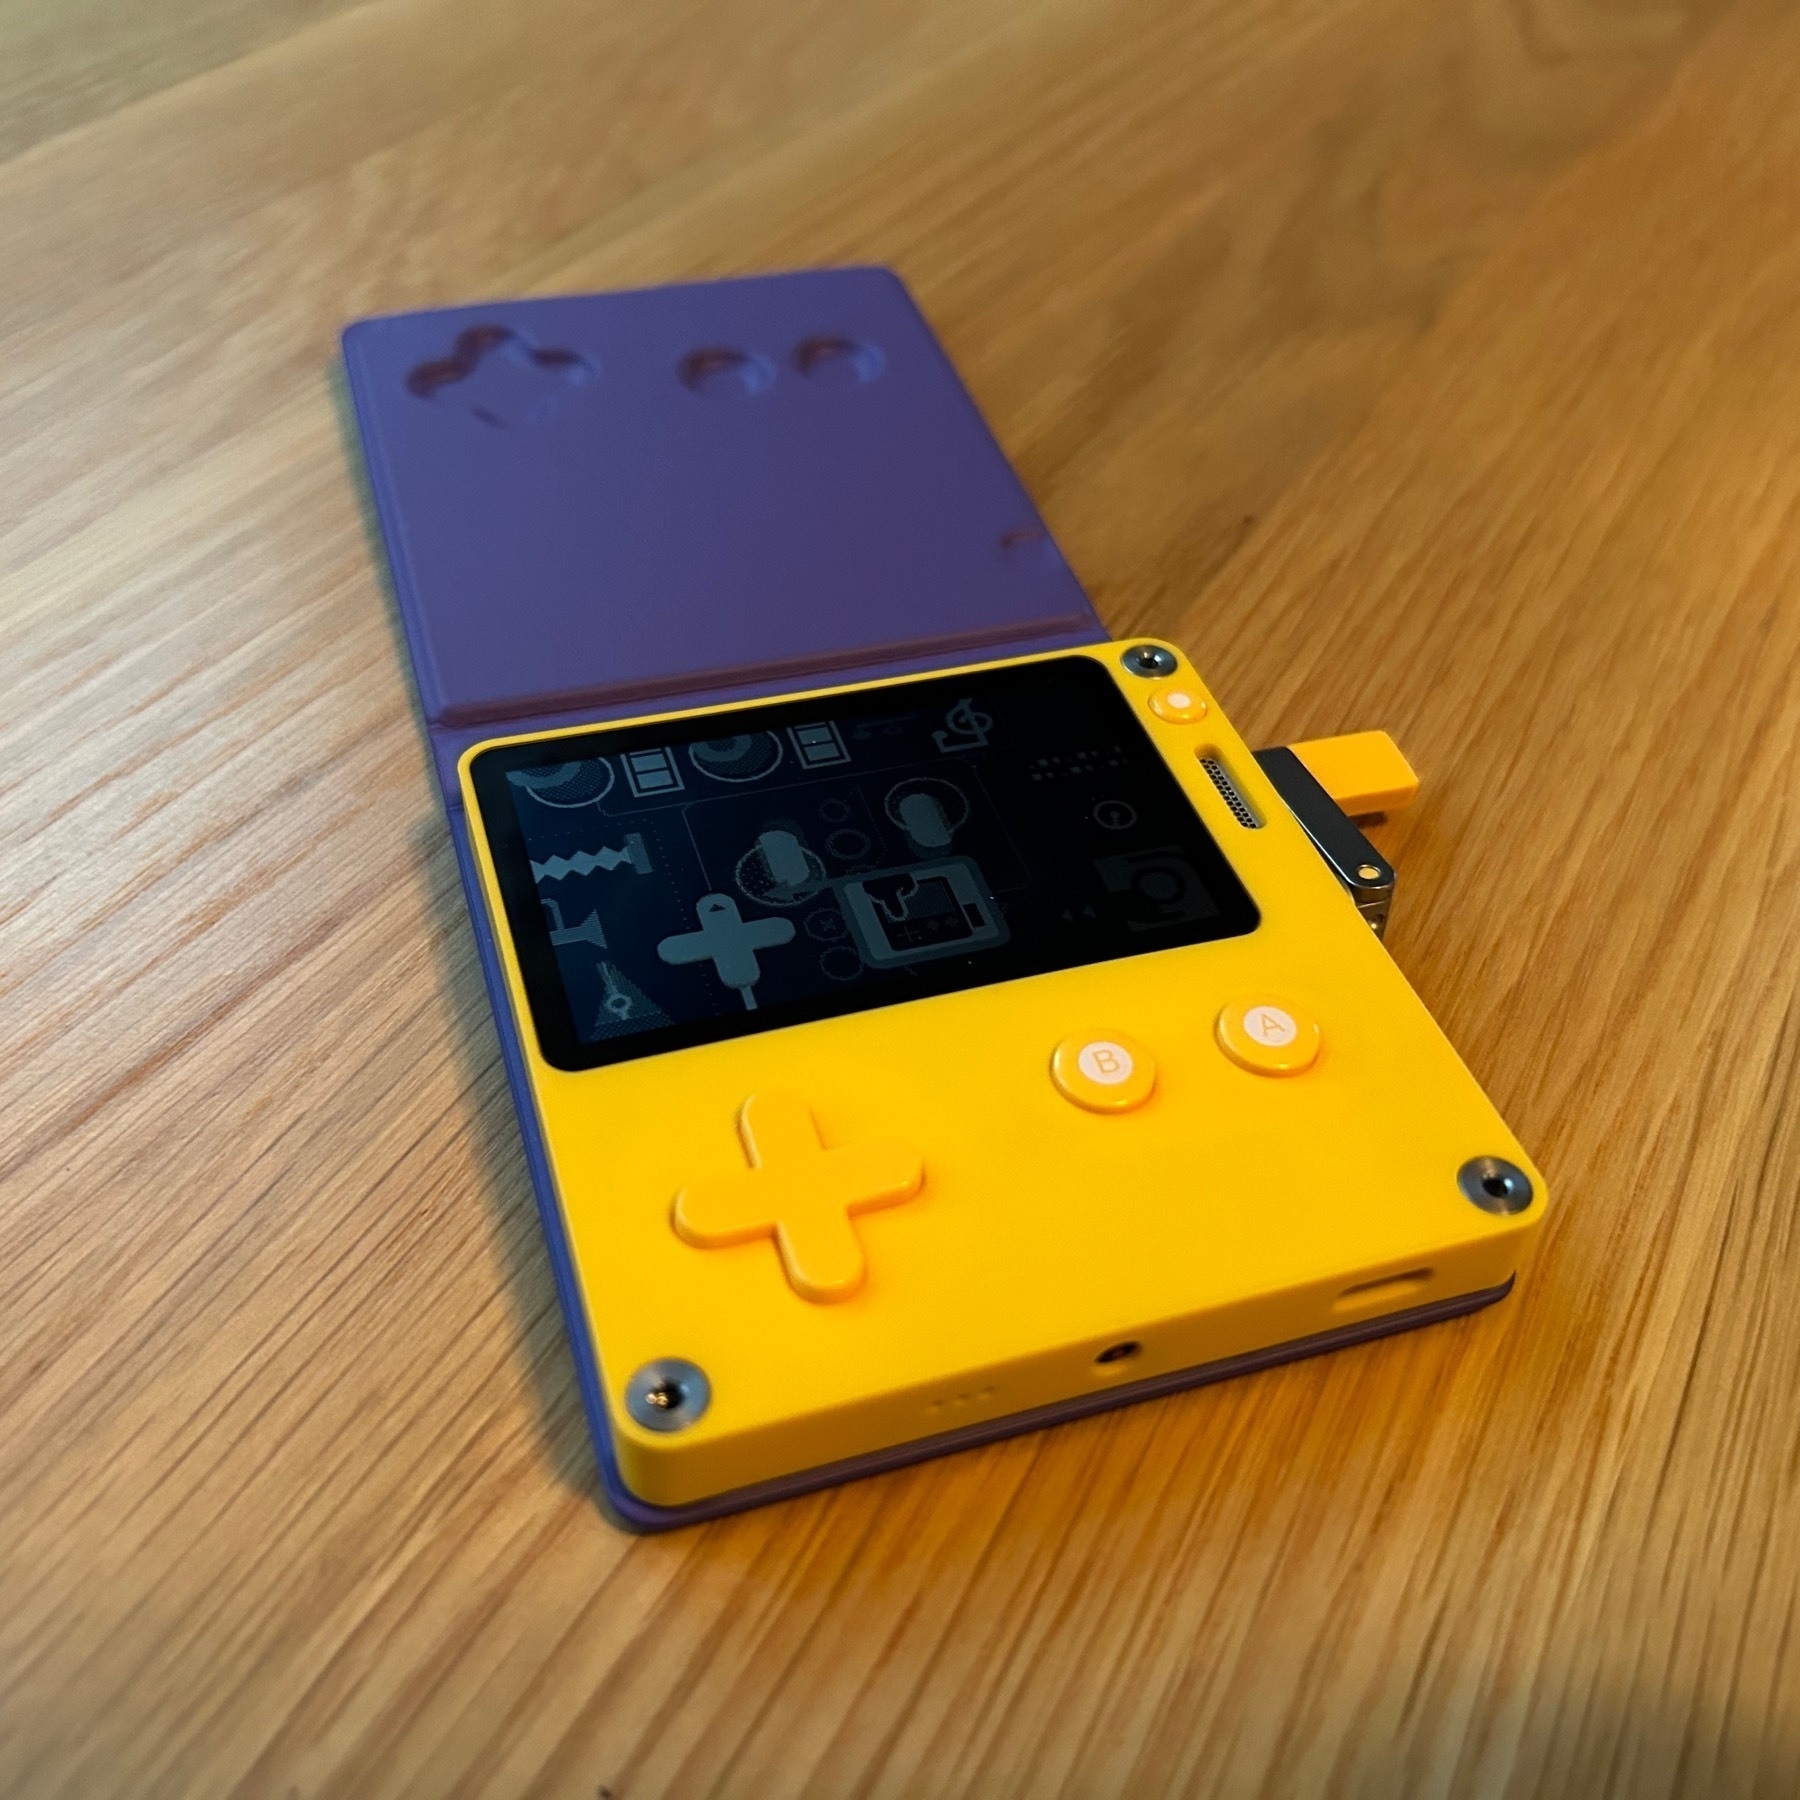 Small yellow and purple play date video game system with LED screen sitting on a wooden table. 